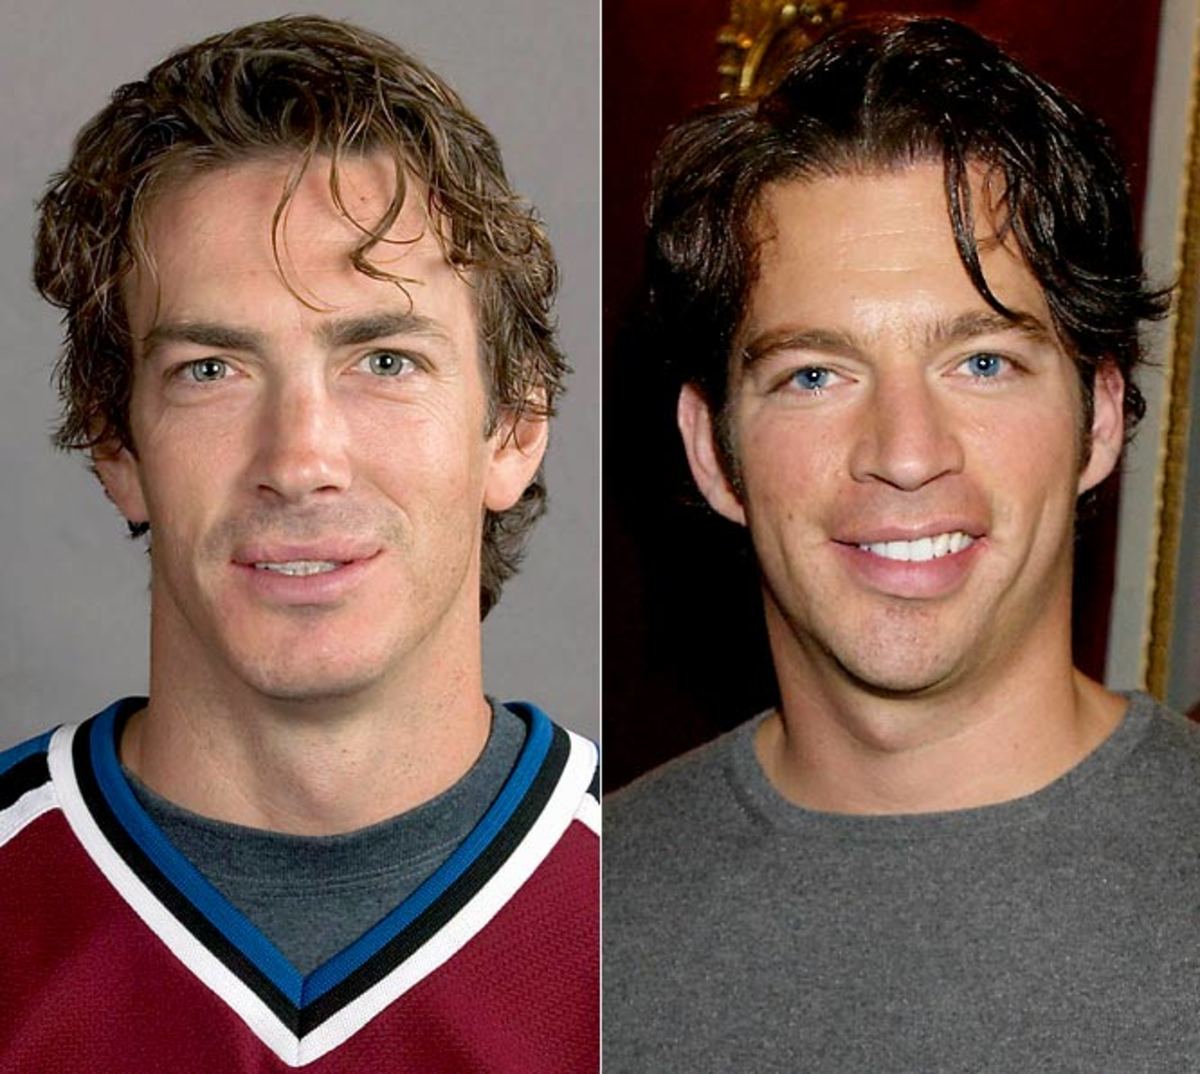 NHL players resembling entertainers